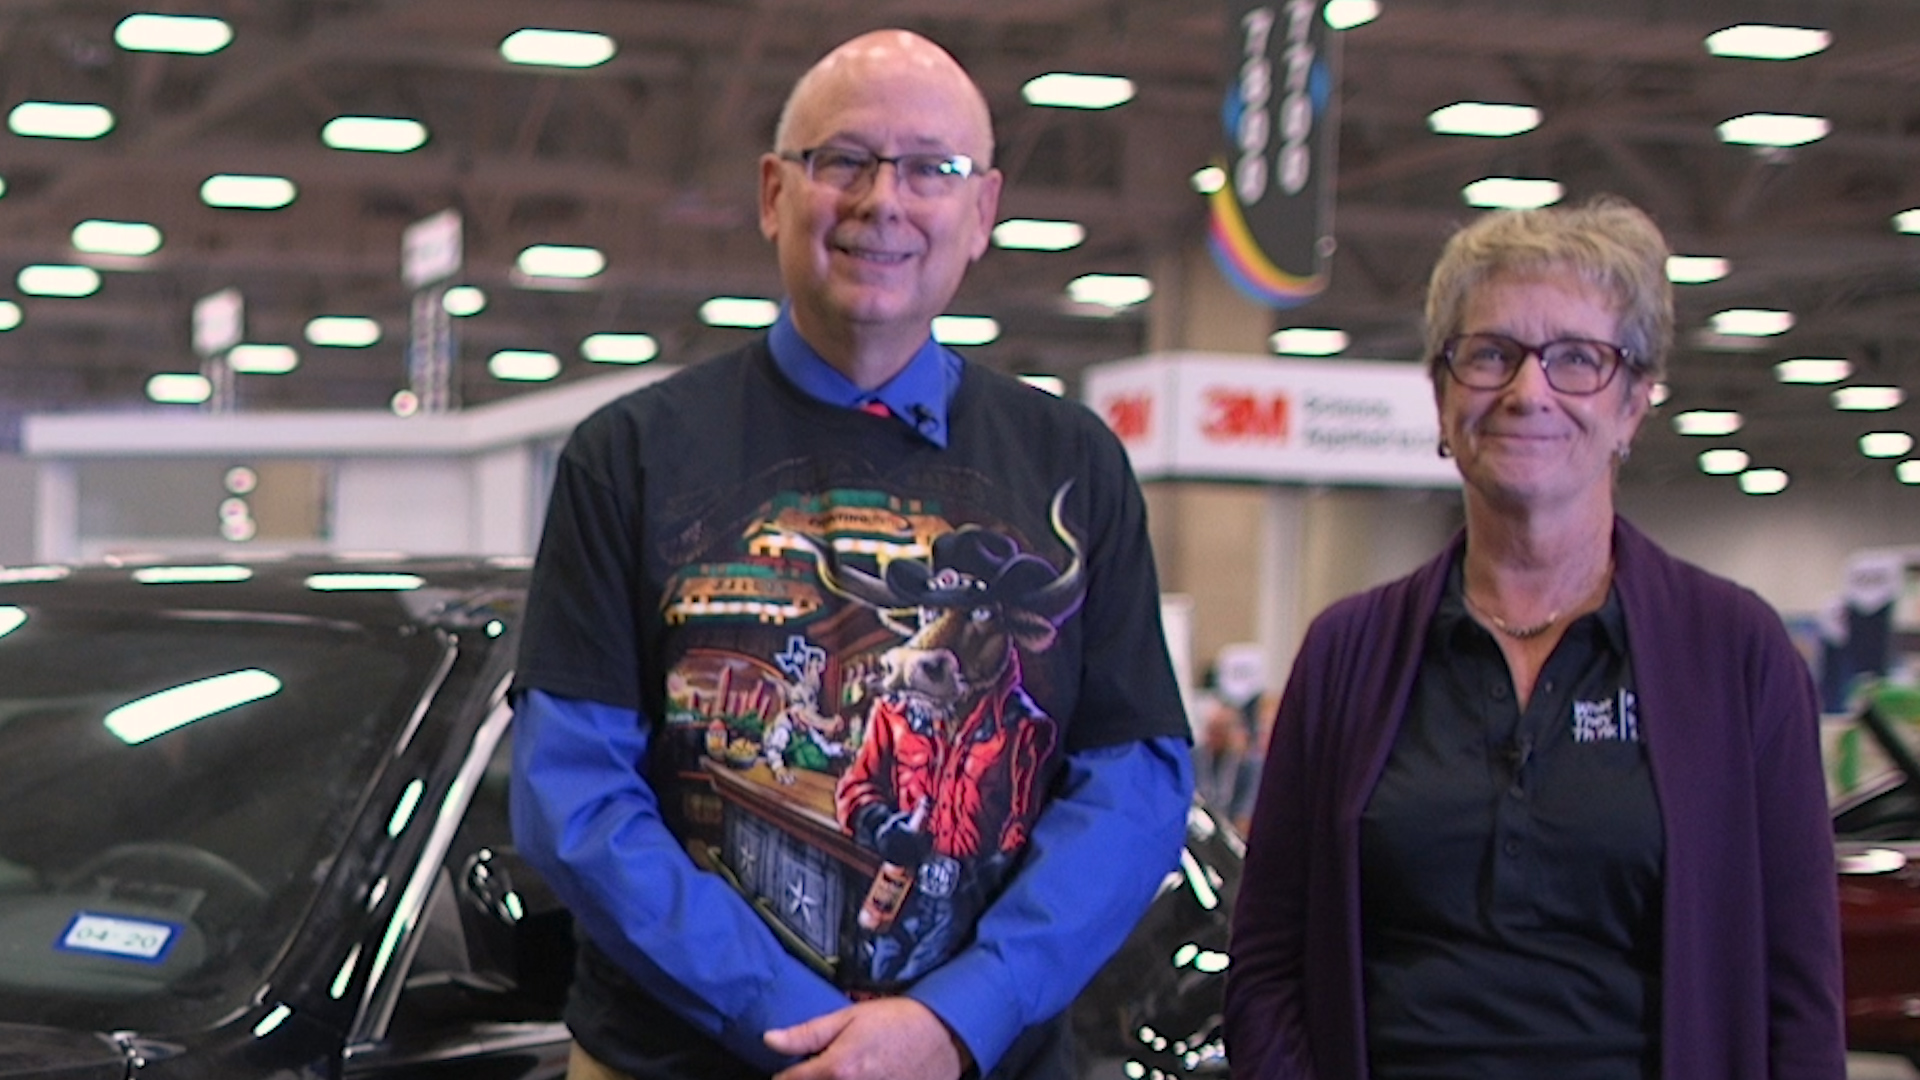 Car Wrap Competition Drives Attendee Interest at PRINTING United